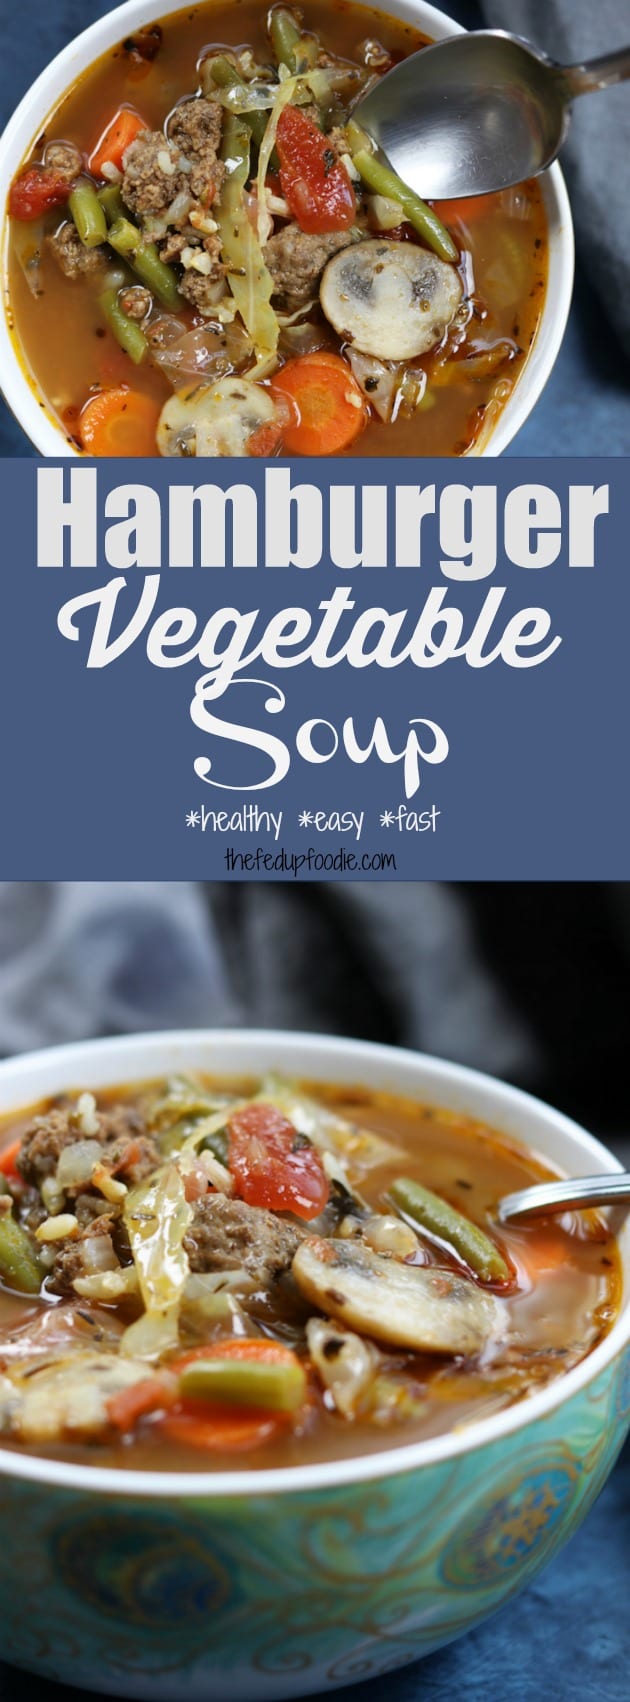 Hamburger Vegetable Soup recipe is warm, satisfying and full of healthy veggies. With just a few steps and simple ingredients it is the best easy meal for chilly nights. Hearty, crock pot, slow cooker, skinny, diet, quick, homemade, gluten-free, ground hamburger, beef, cabbage, tomatoes and beef broth. https://www.thefedupfoodie.com